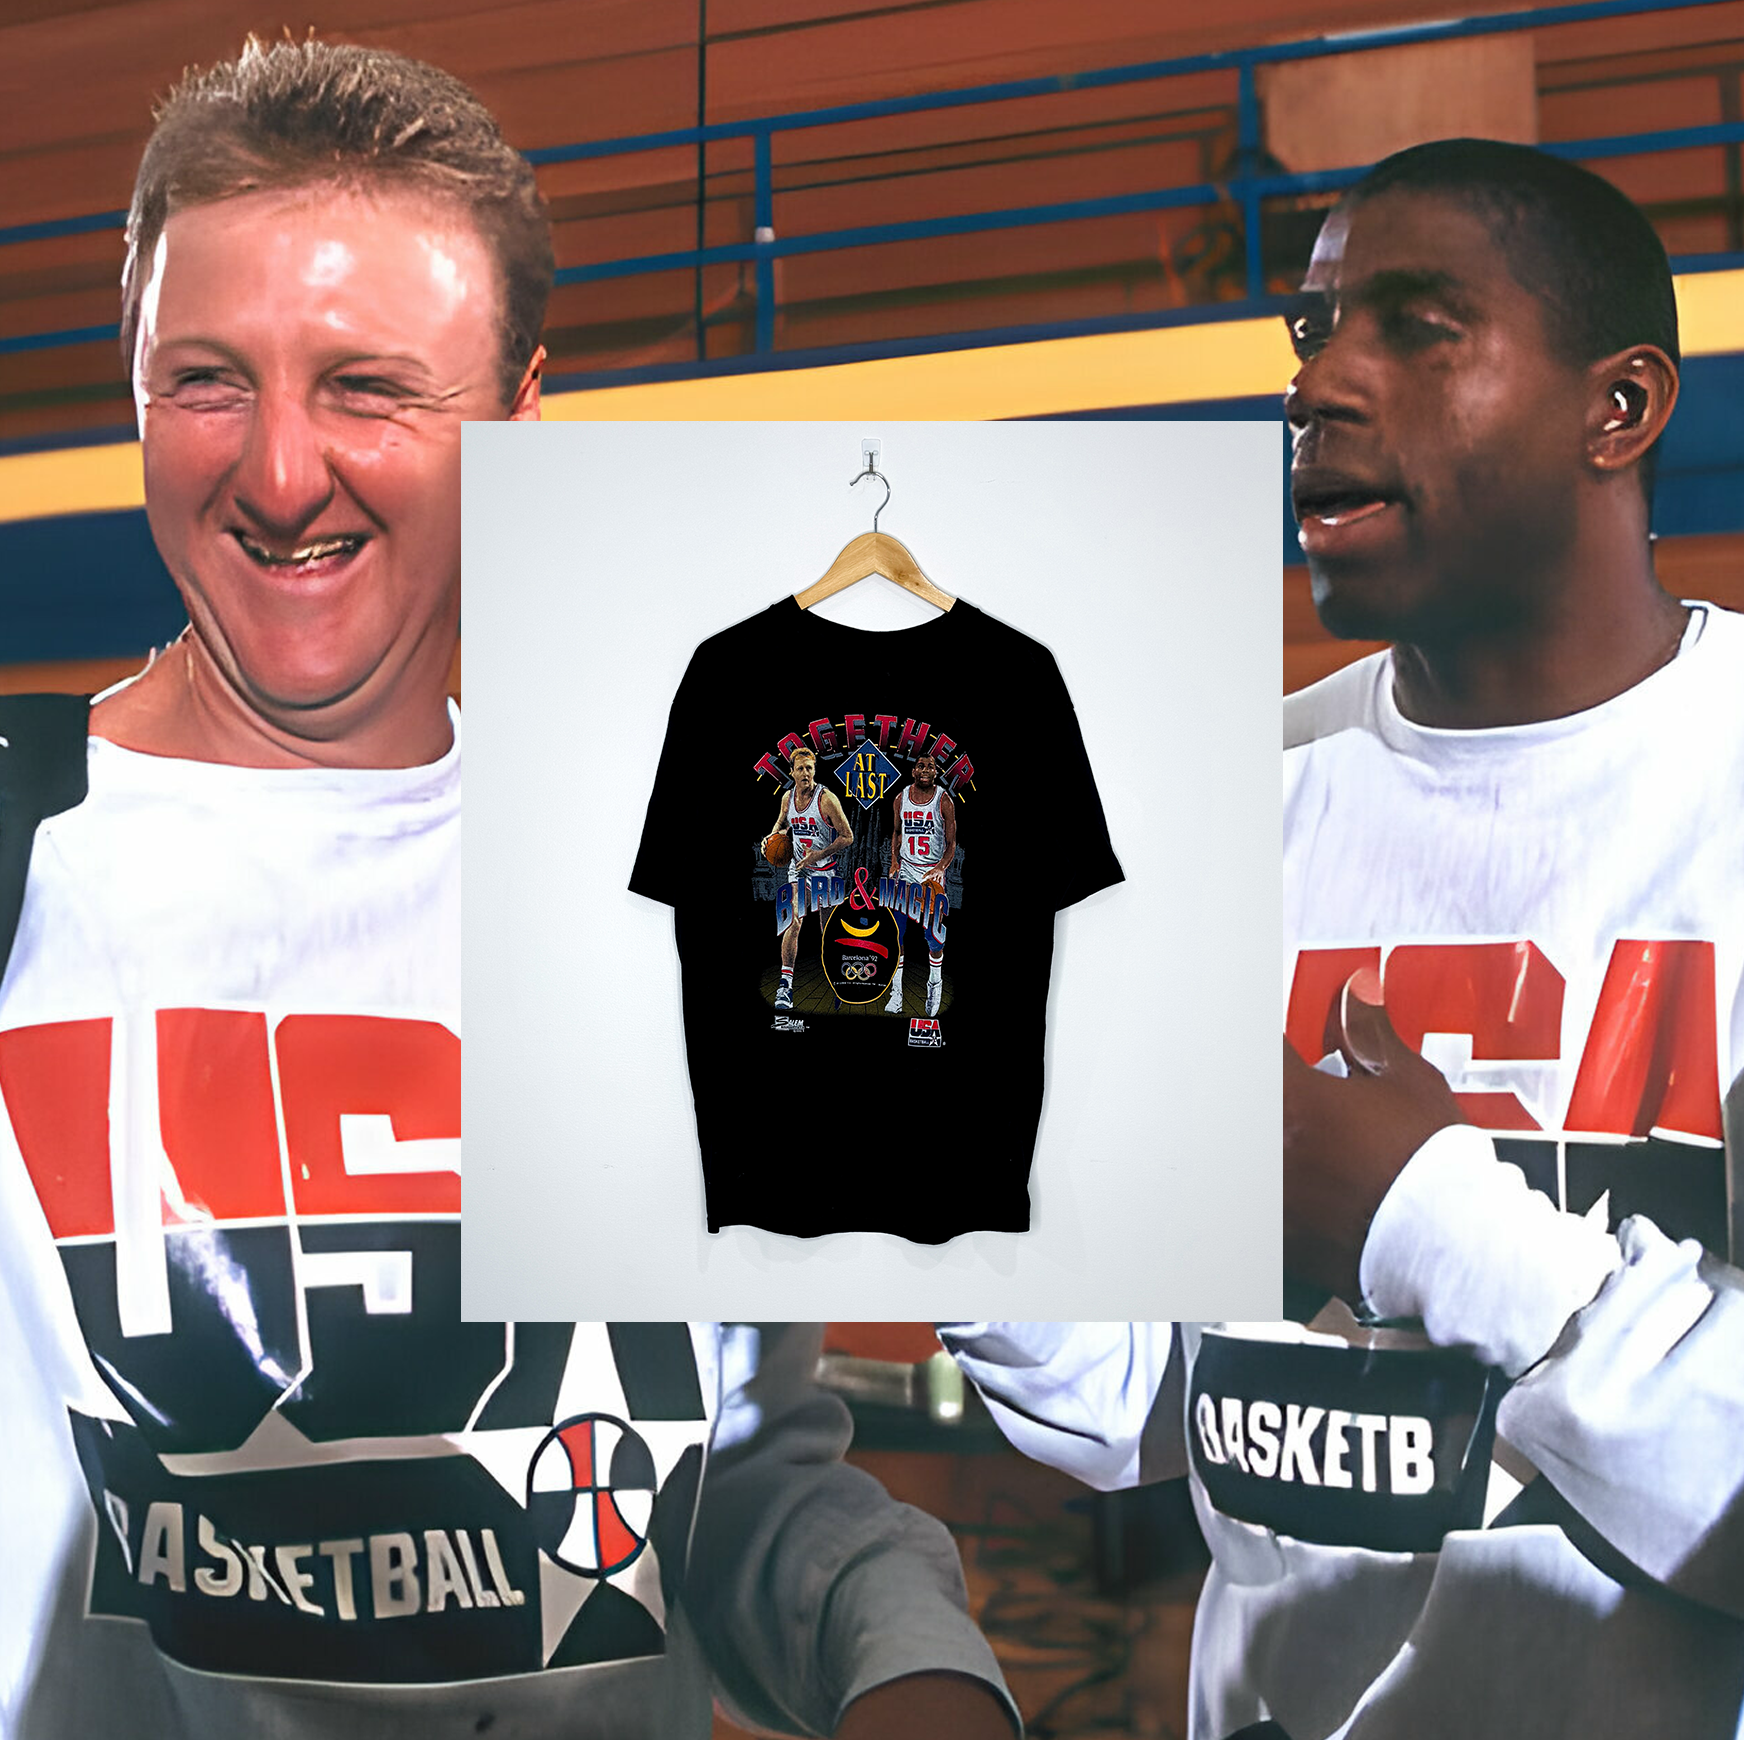 USA BASKETBALL "Magic & Larry Together at Last" VINTAGE PLAYER TEE